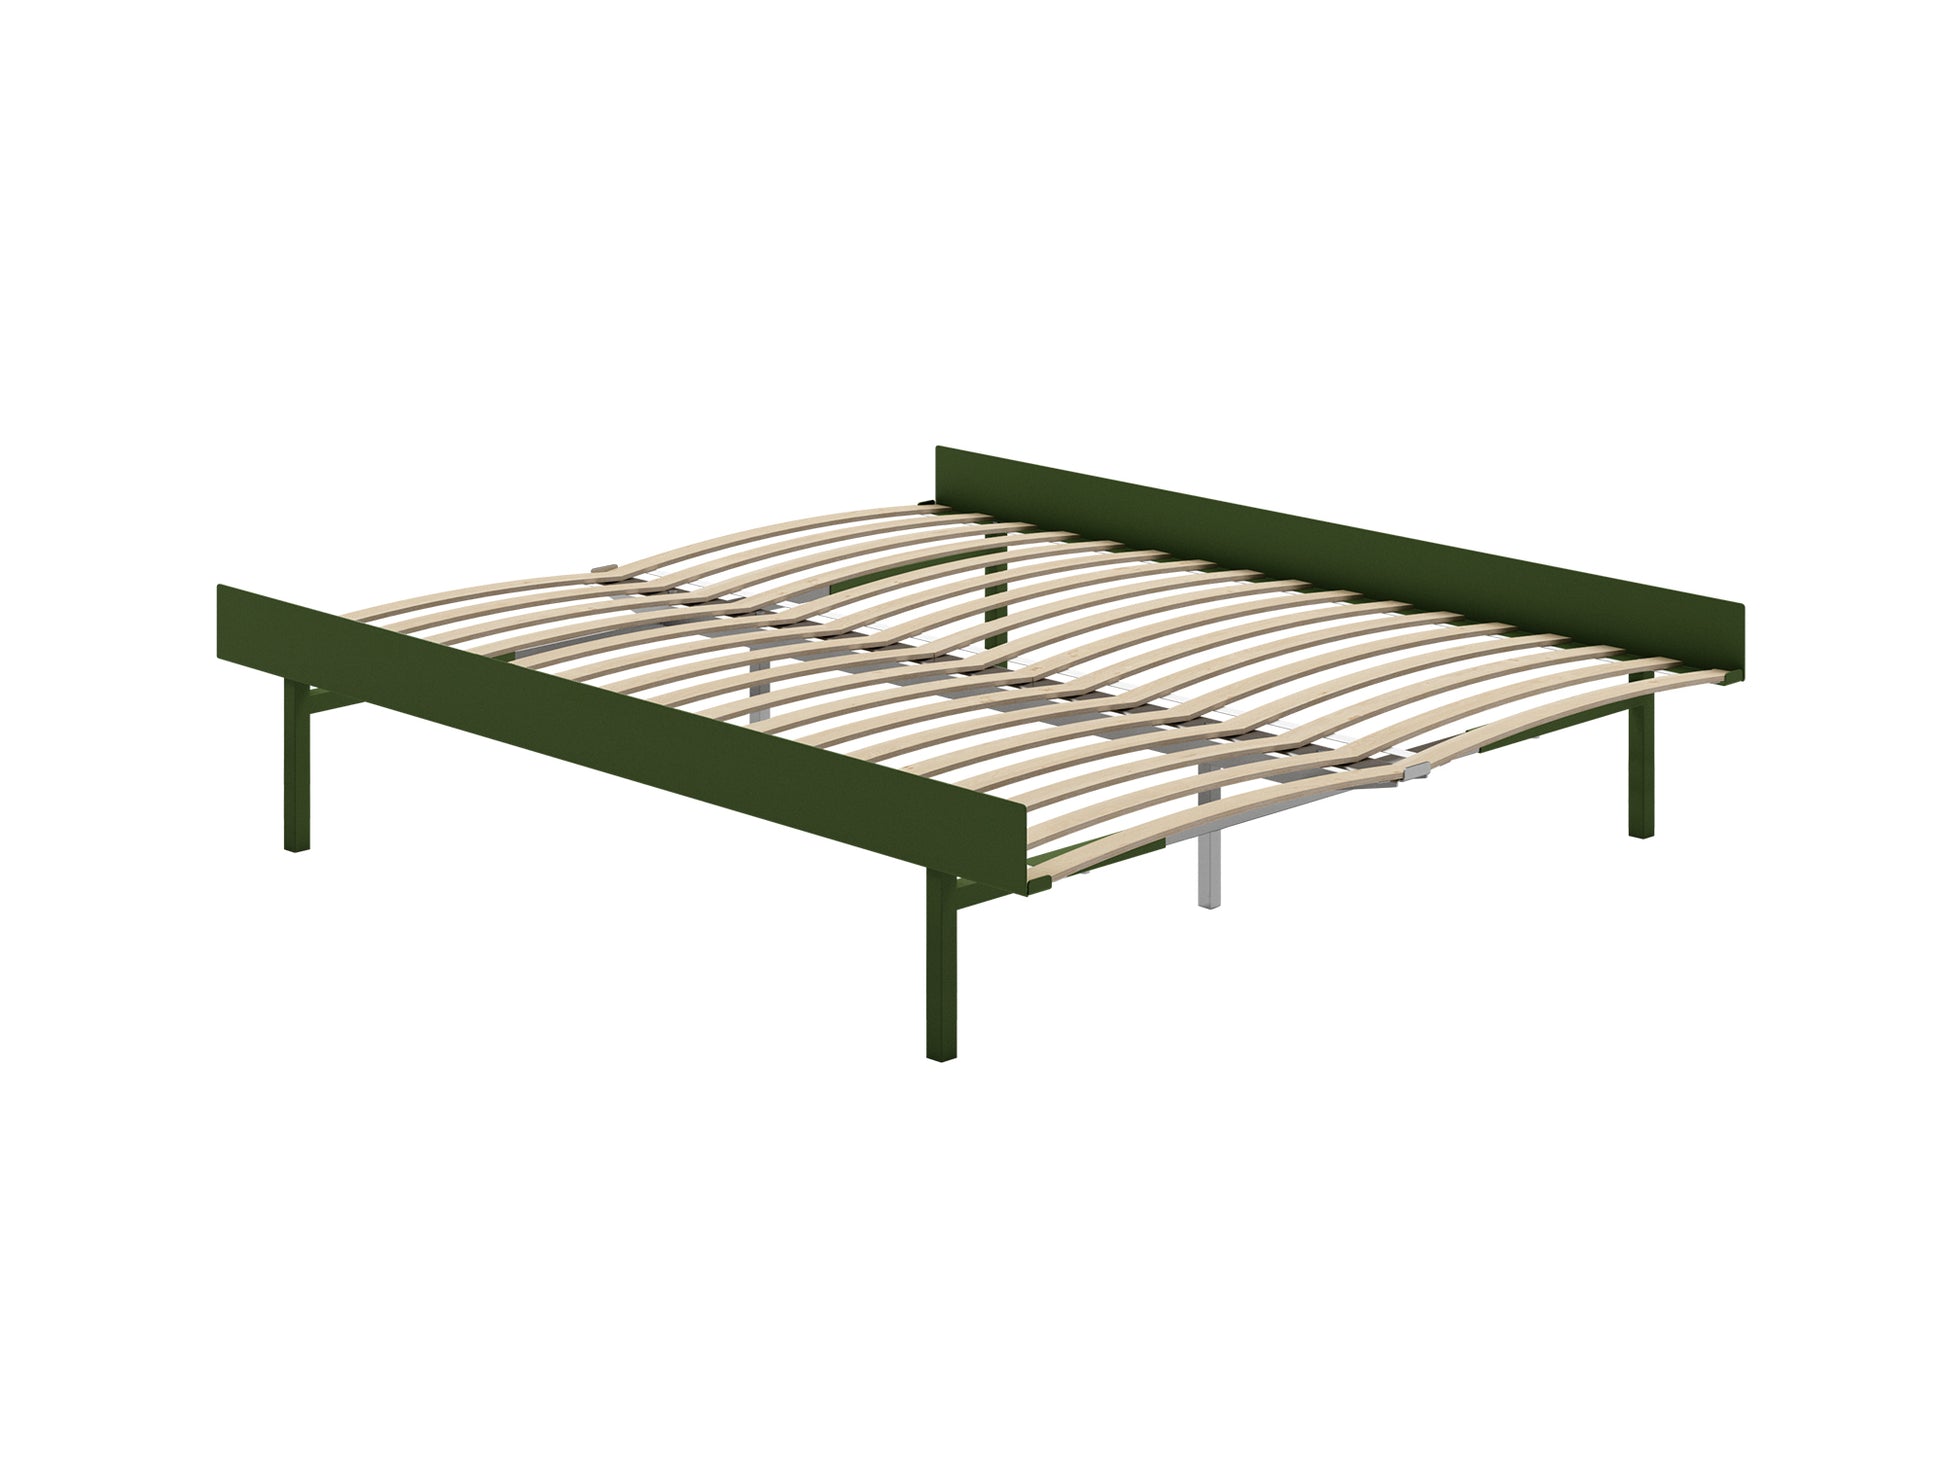 Bed 90 - 180 cm (High) by Moebe- Bed Frame / with 160cm wide Slats / Pine Green